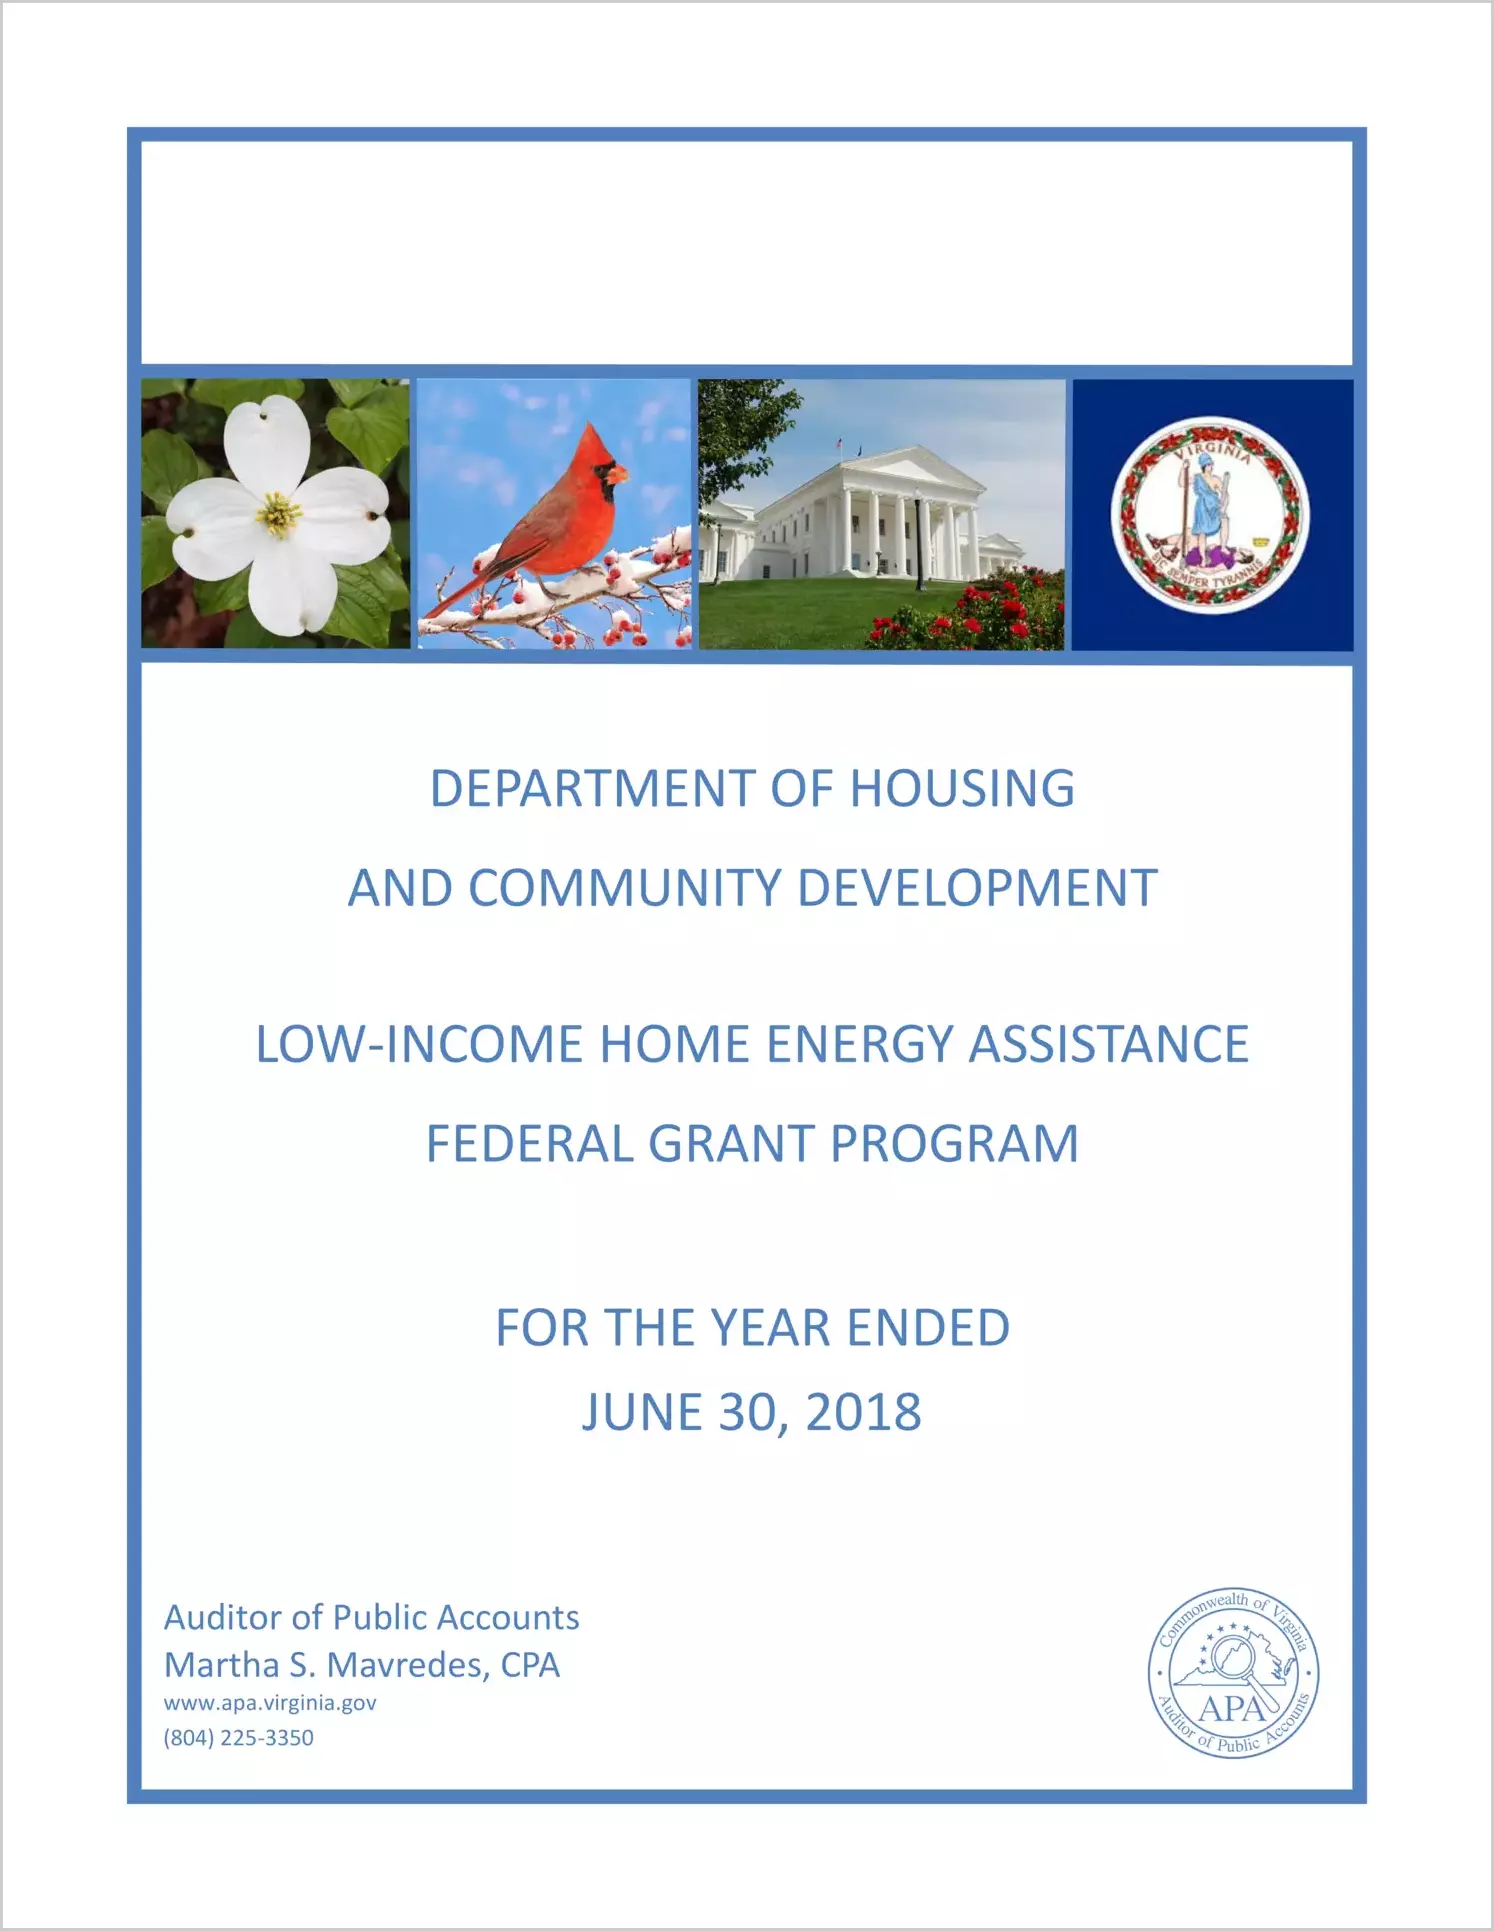 Department of Housing and Community Development Low-Income Home Energy Assistance Federal Grant Program for the year ended June 30, 2018